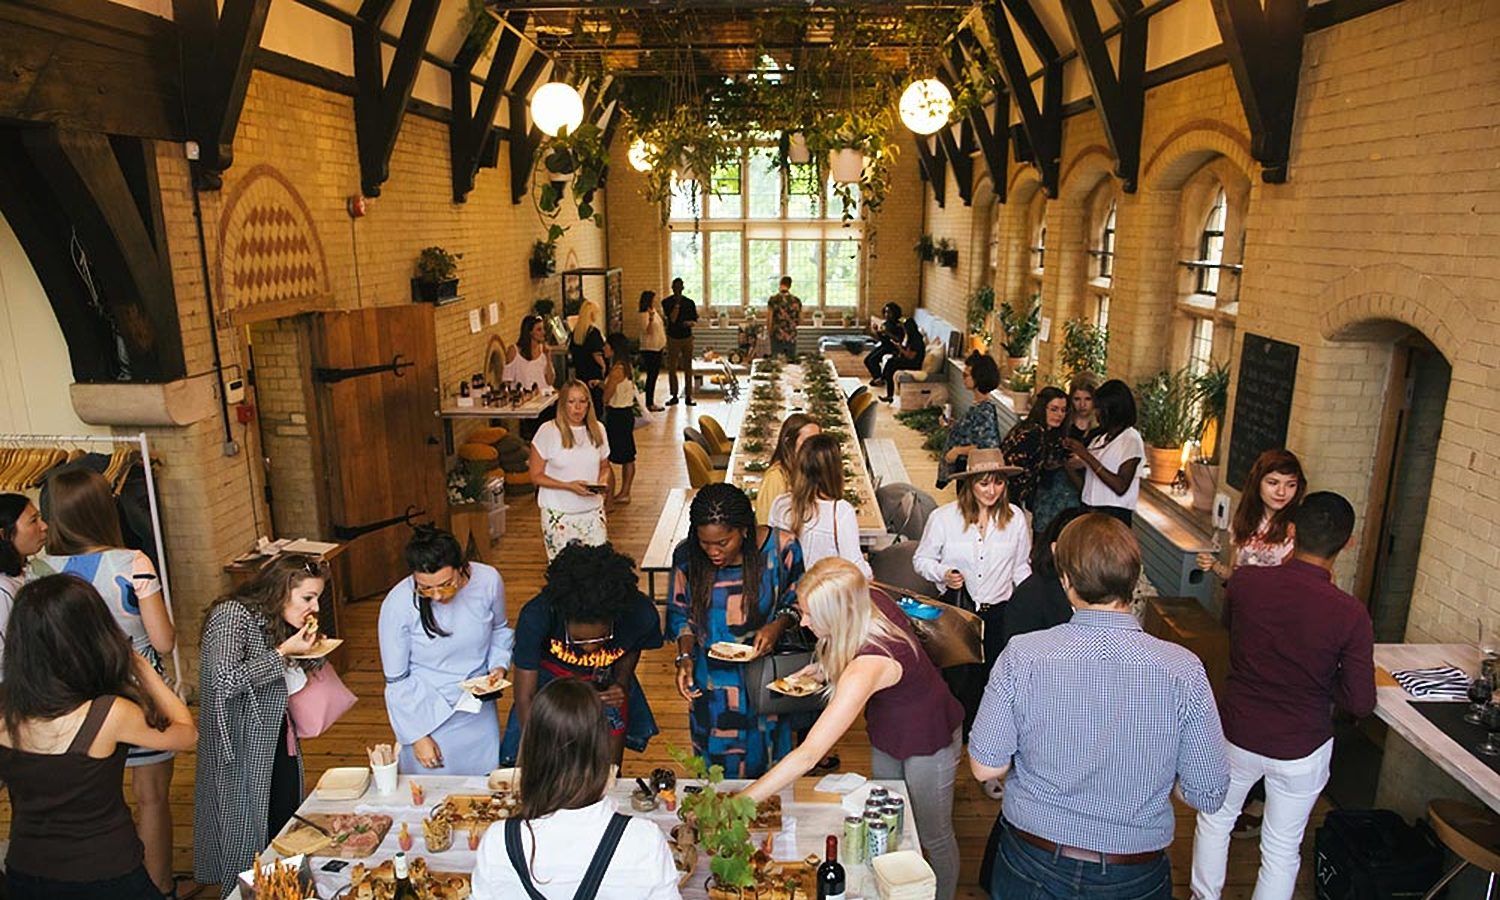 Social entreprise Elysia Catering serves breakfasts and aperitifs at London events using food surplus from artisan producers.